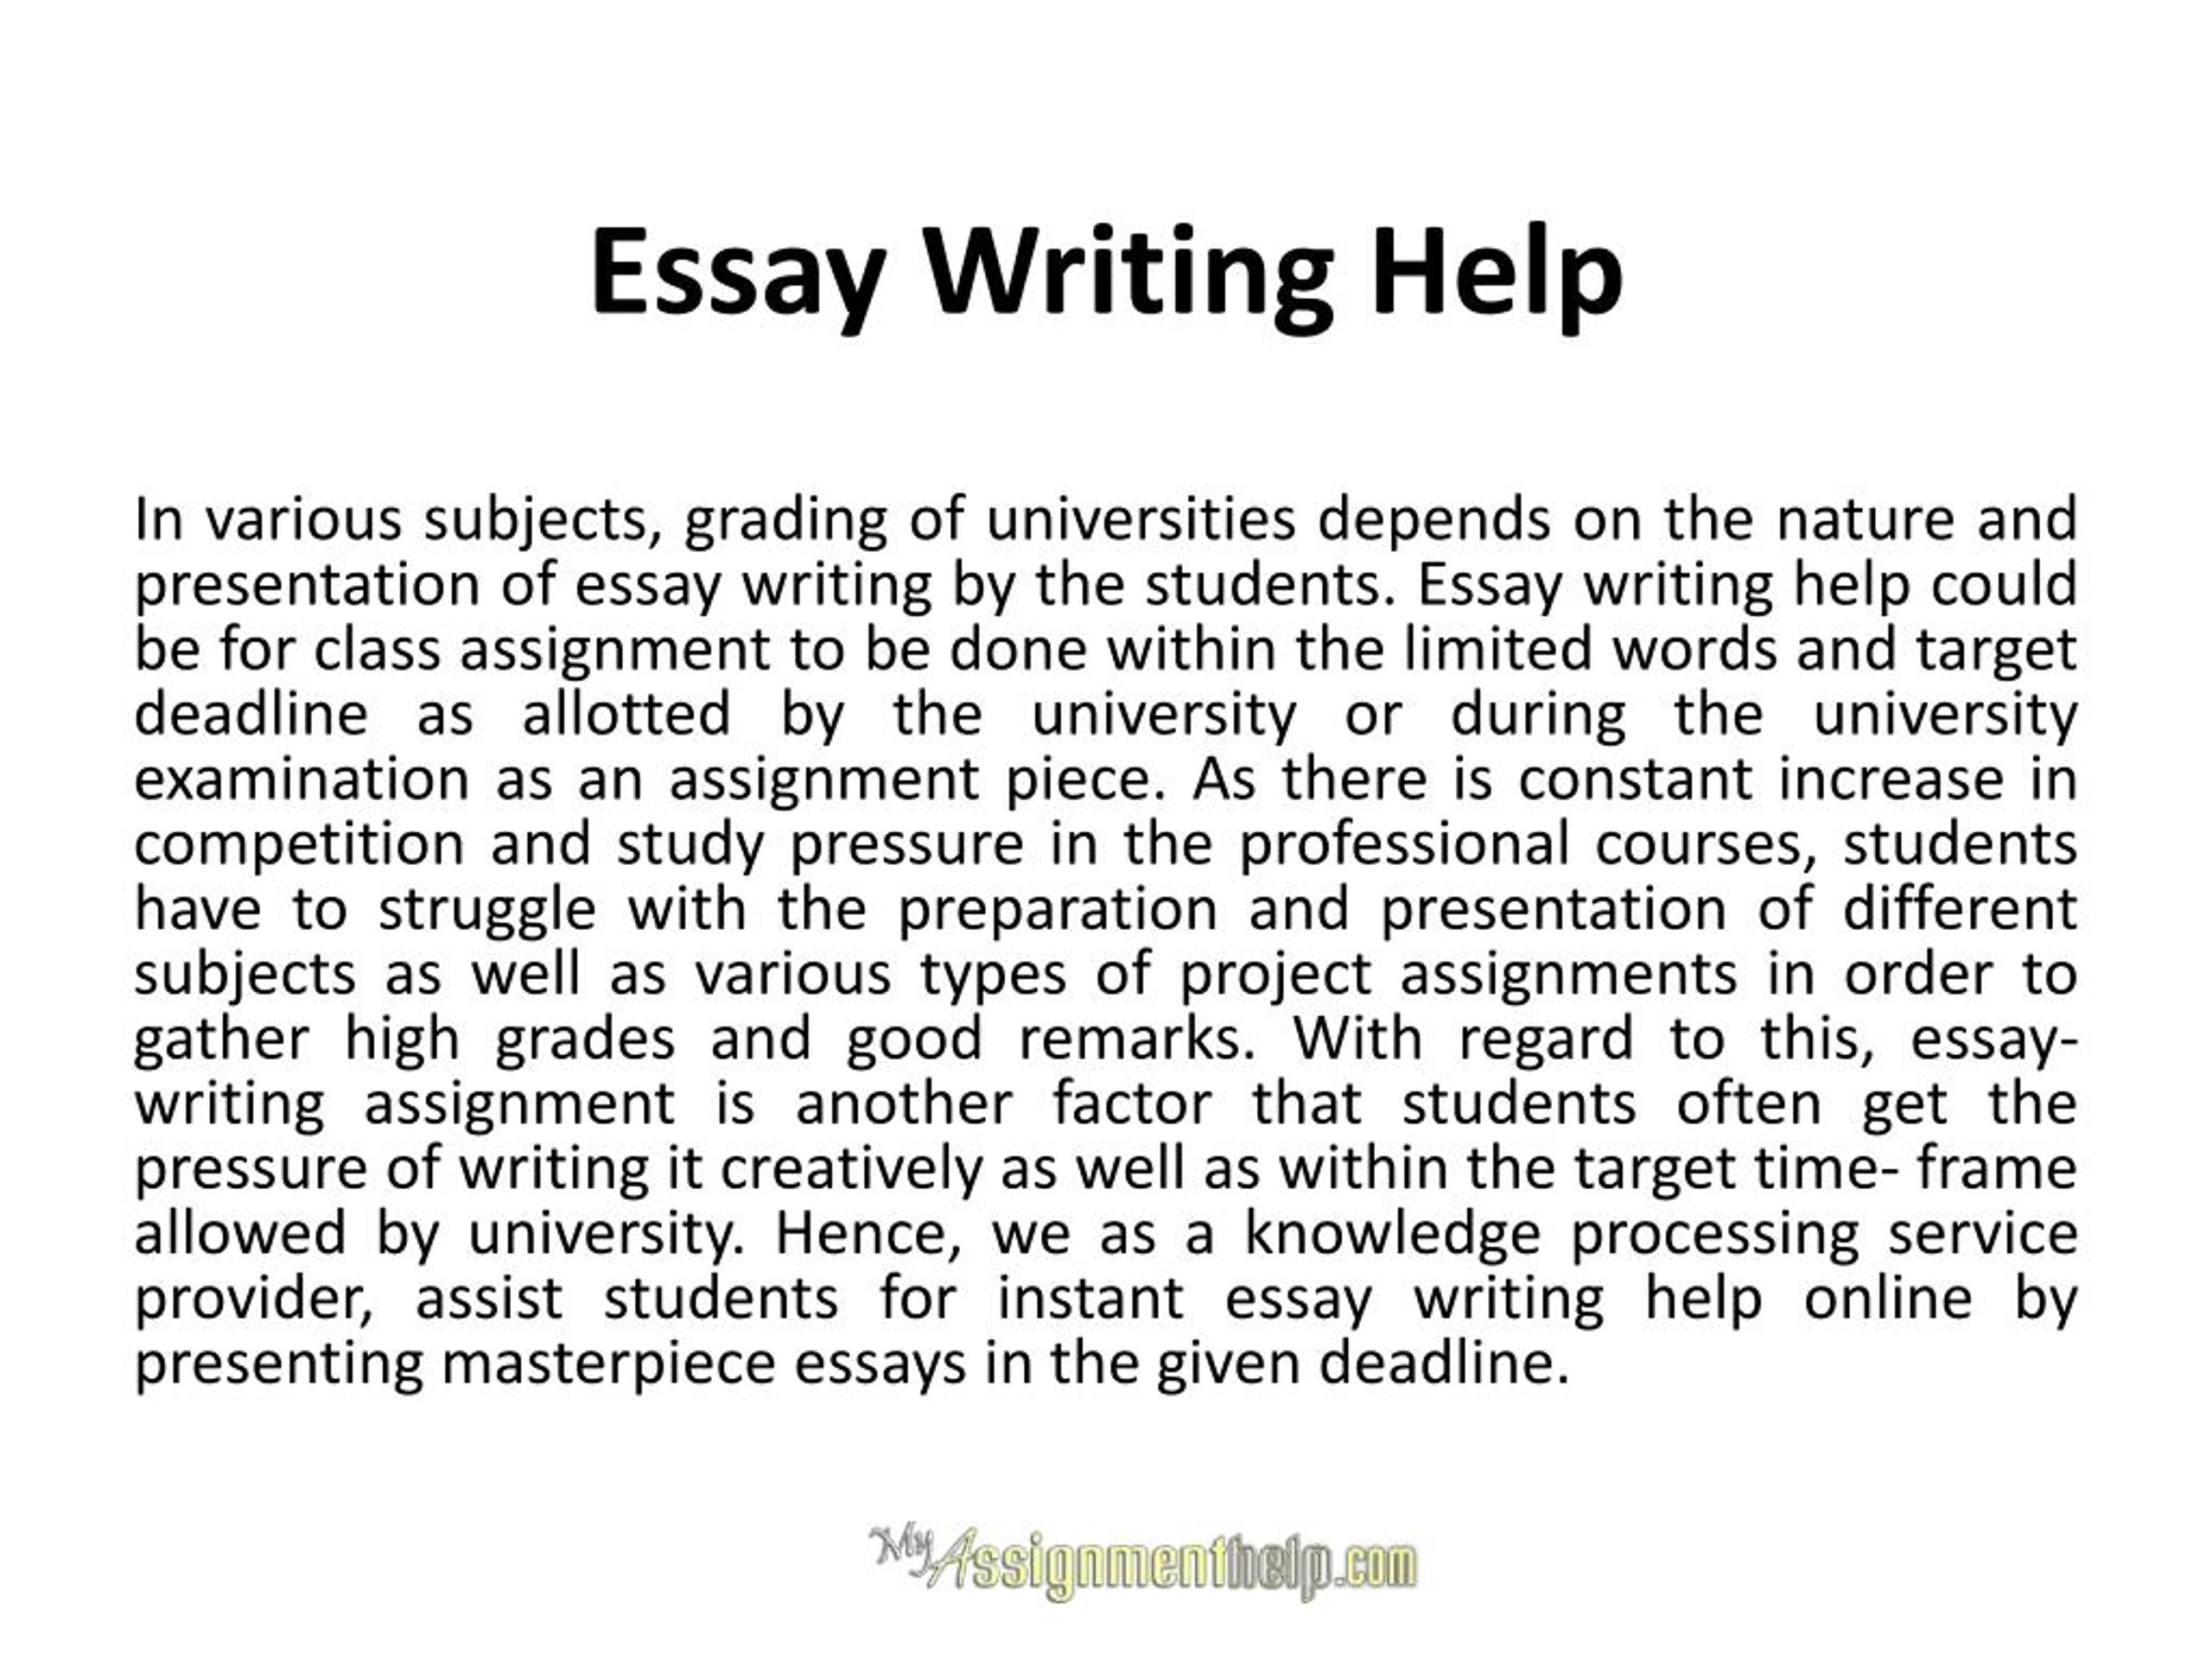 What why how essay writing help